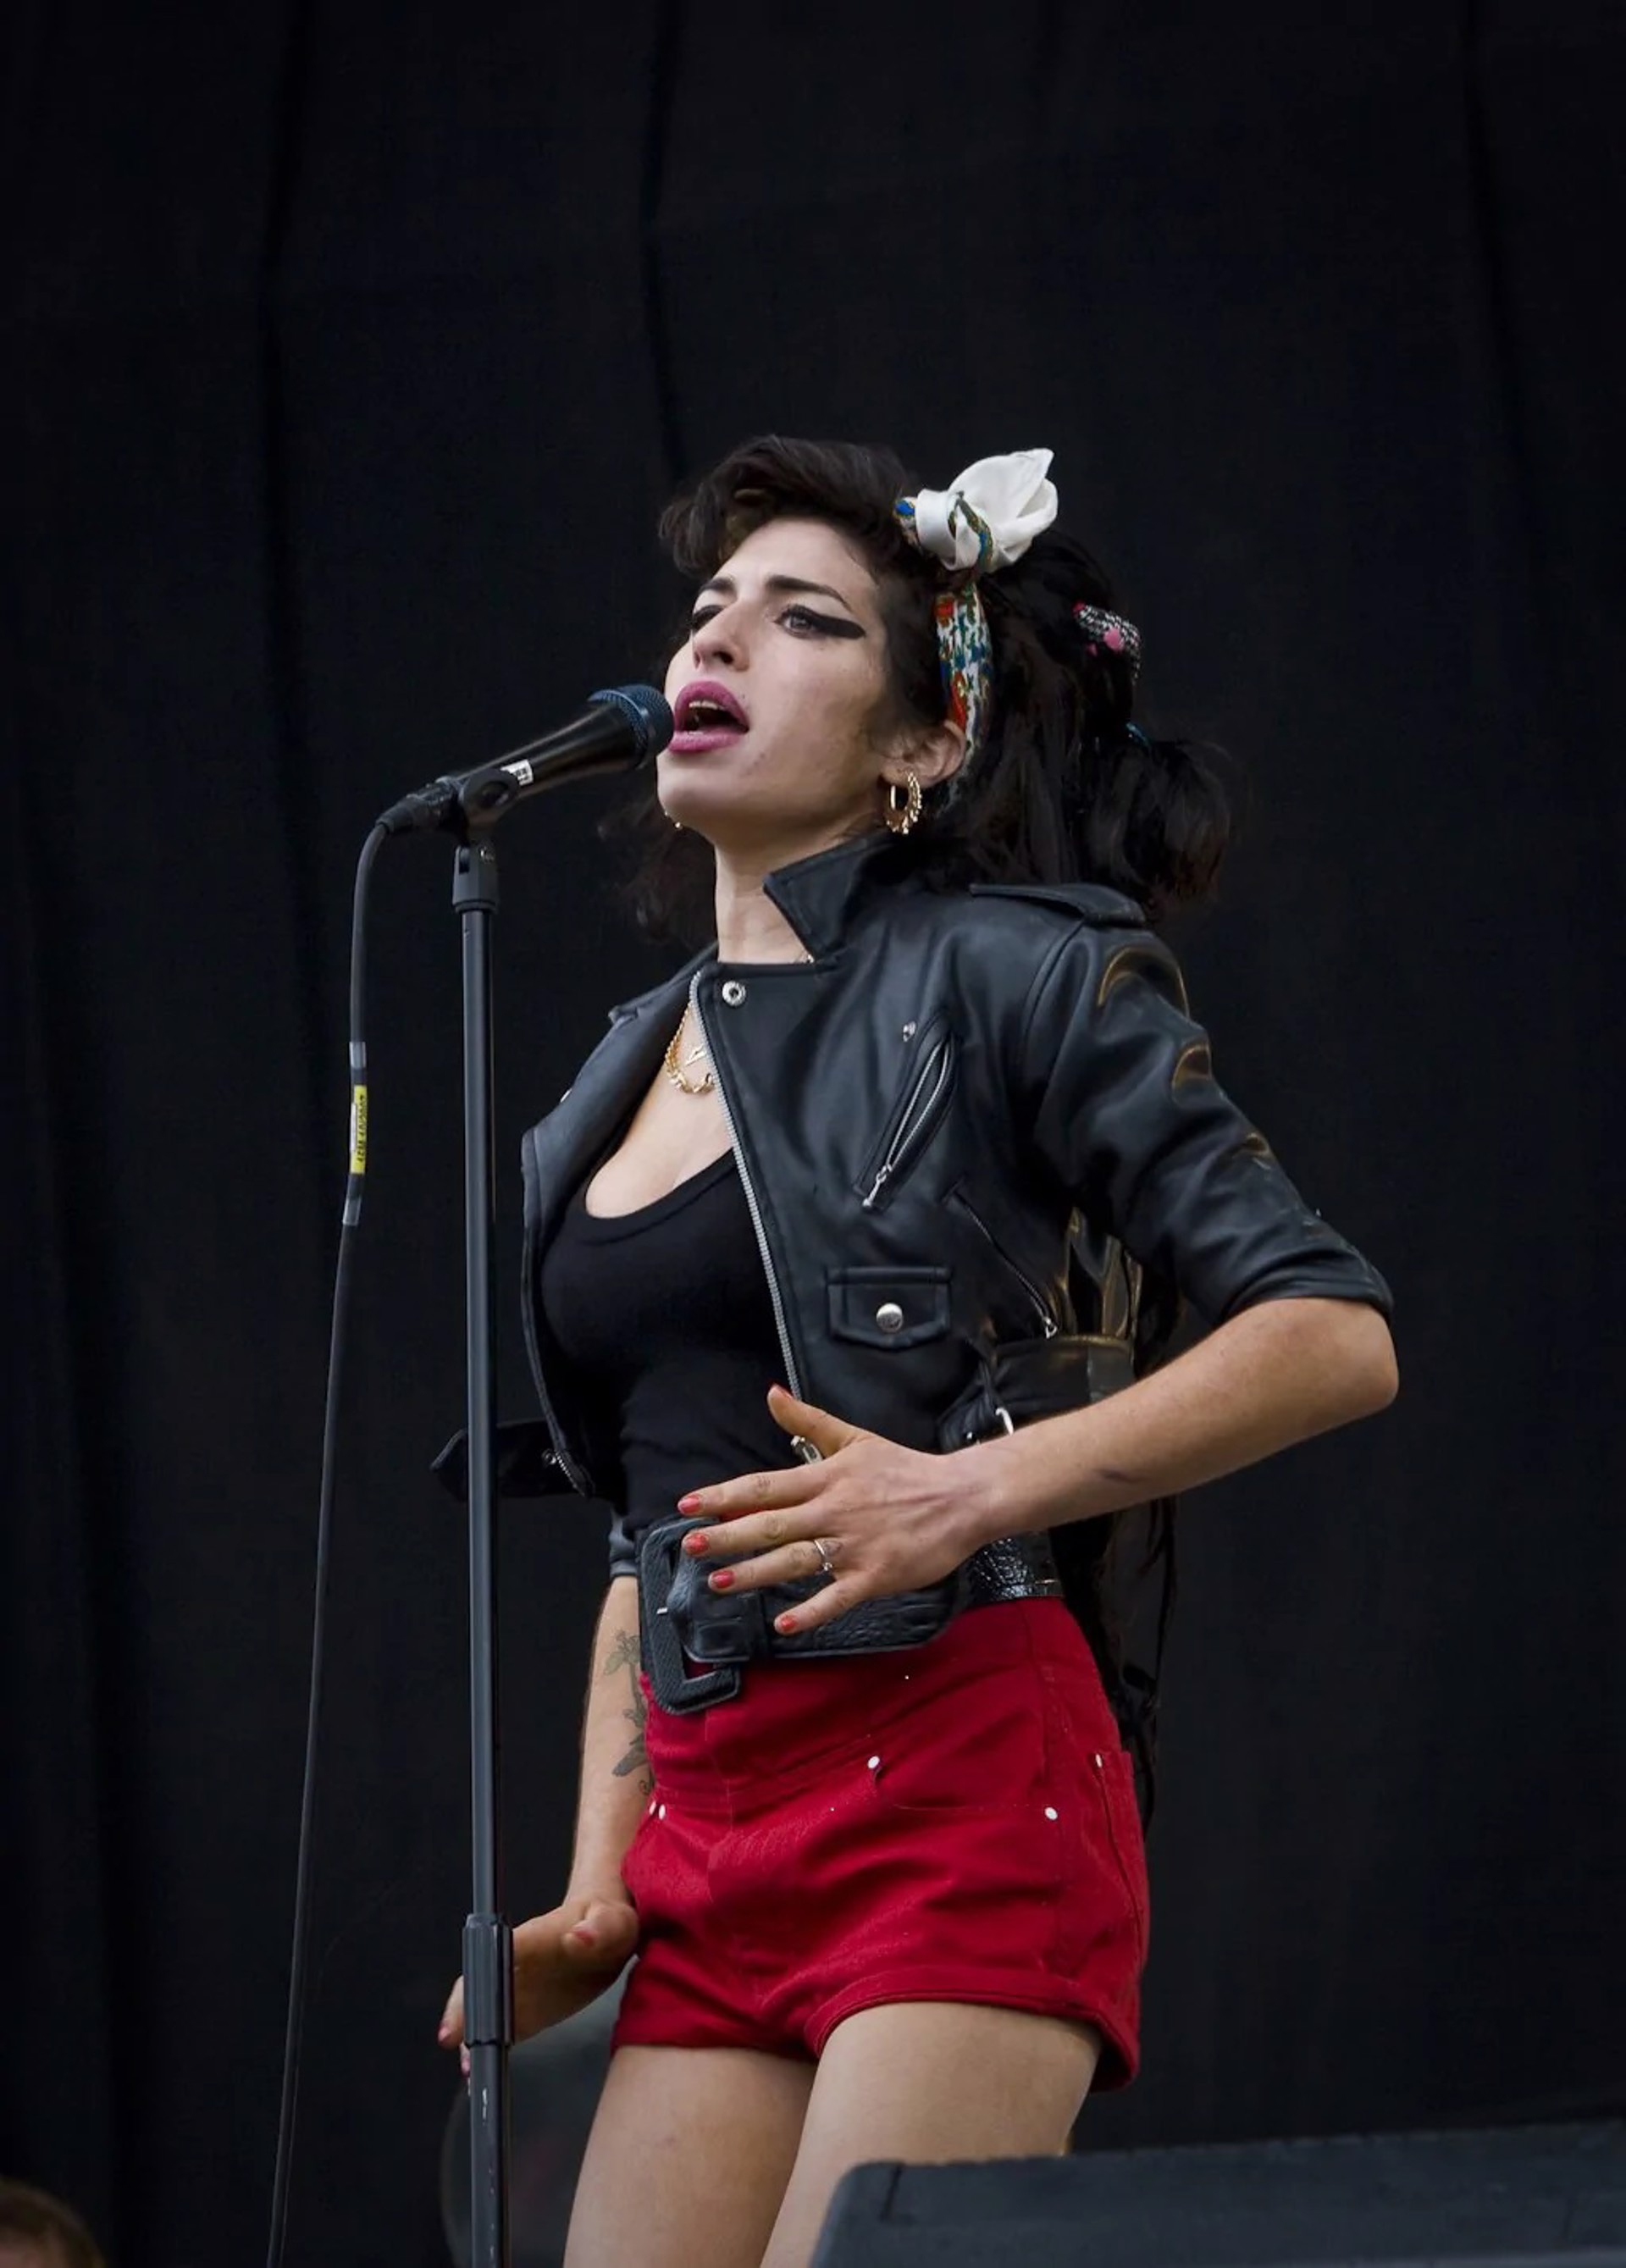 Amy Winehouse by Lucia Remedios